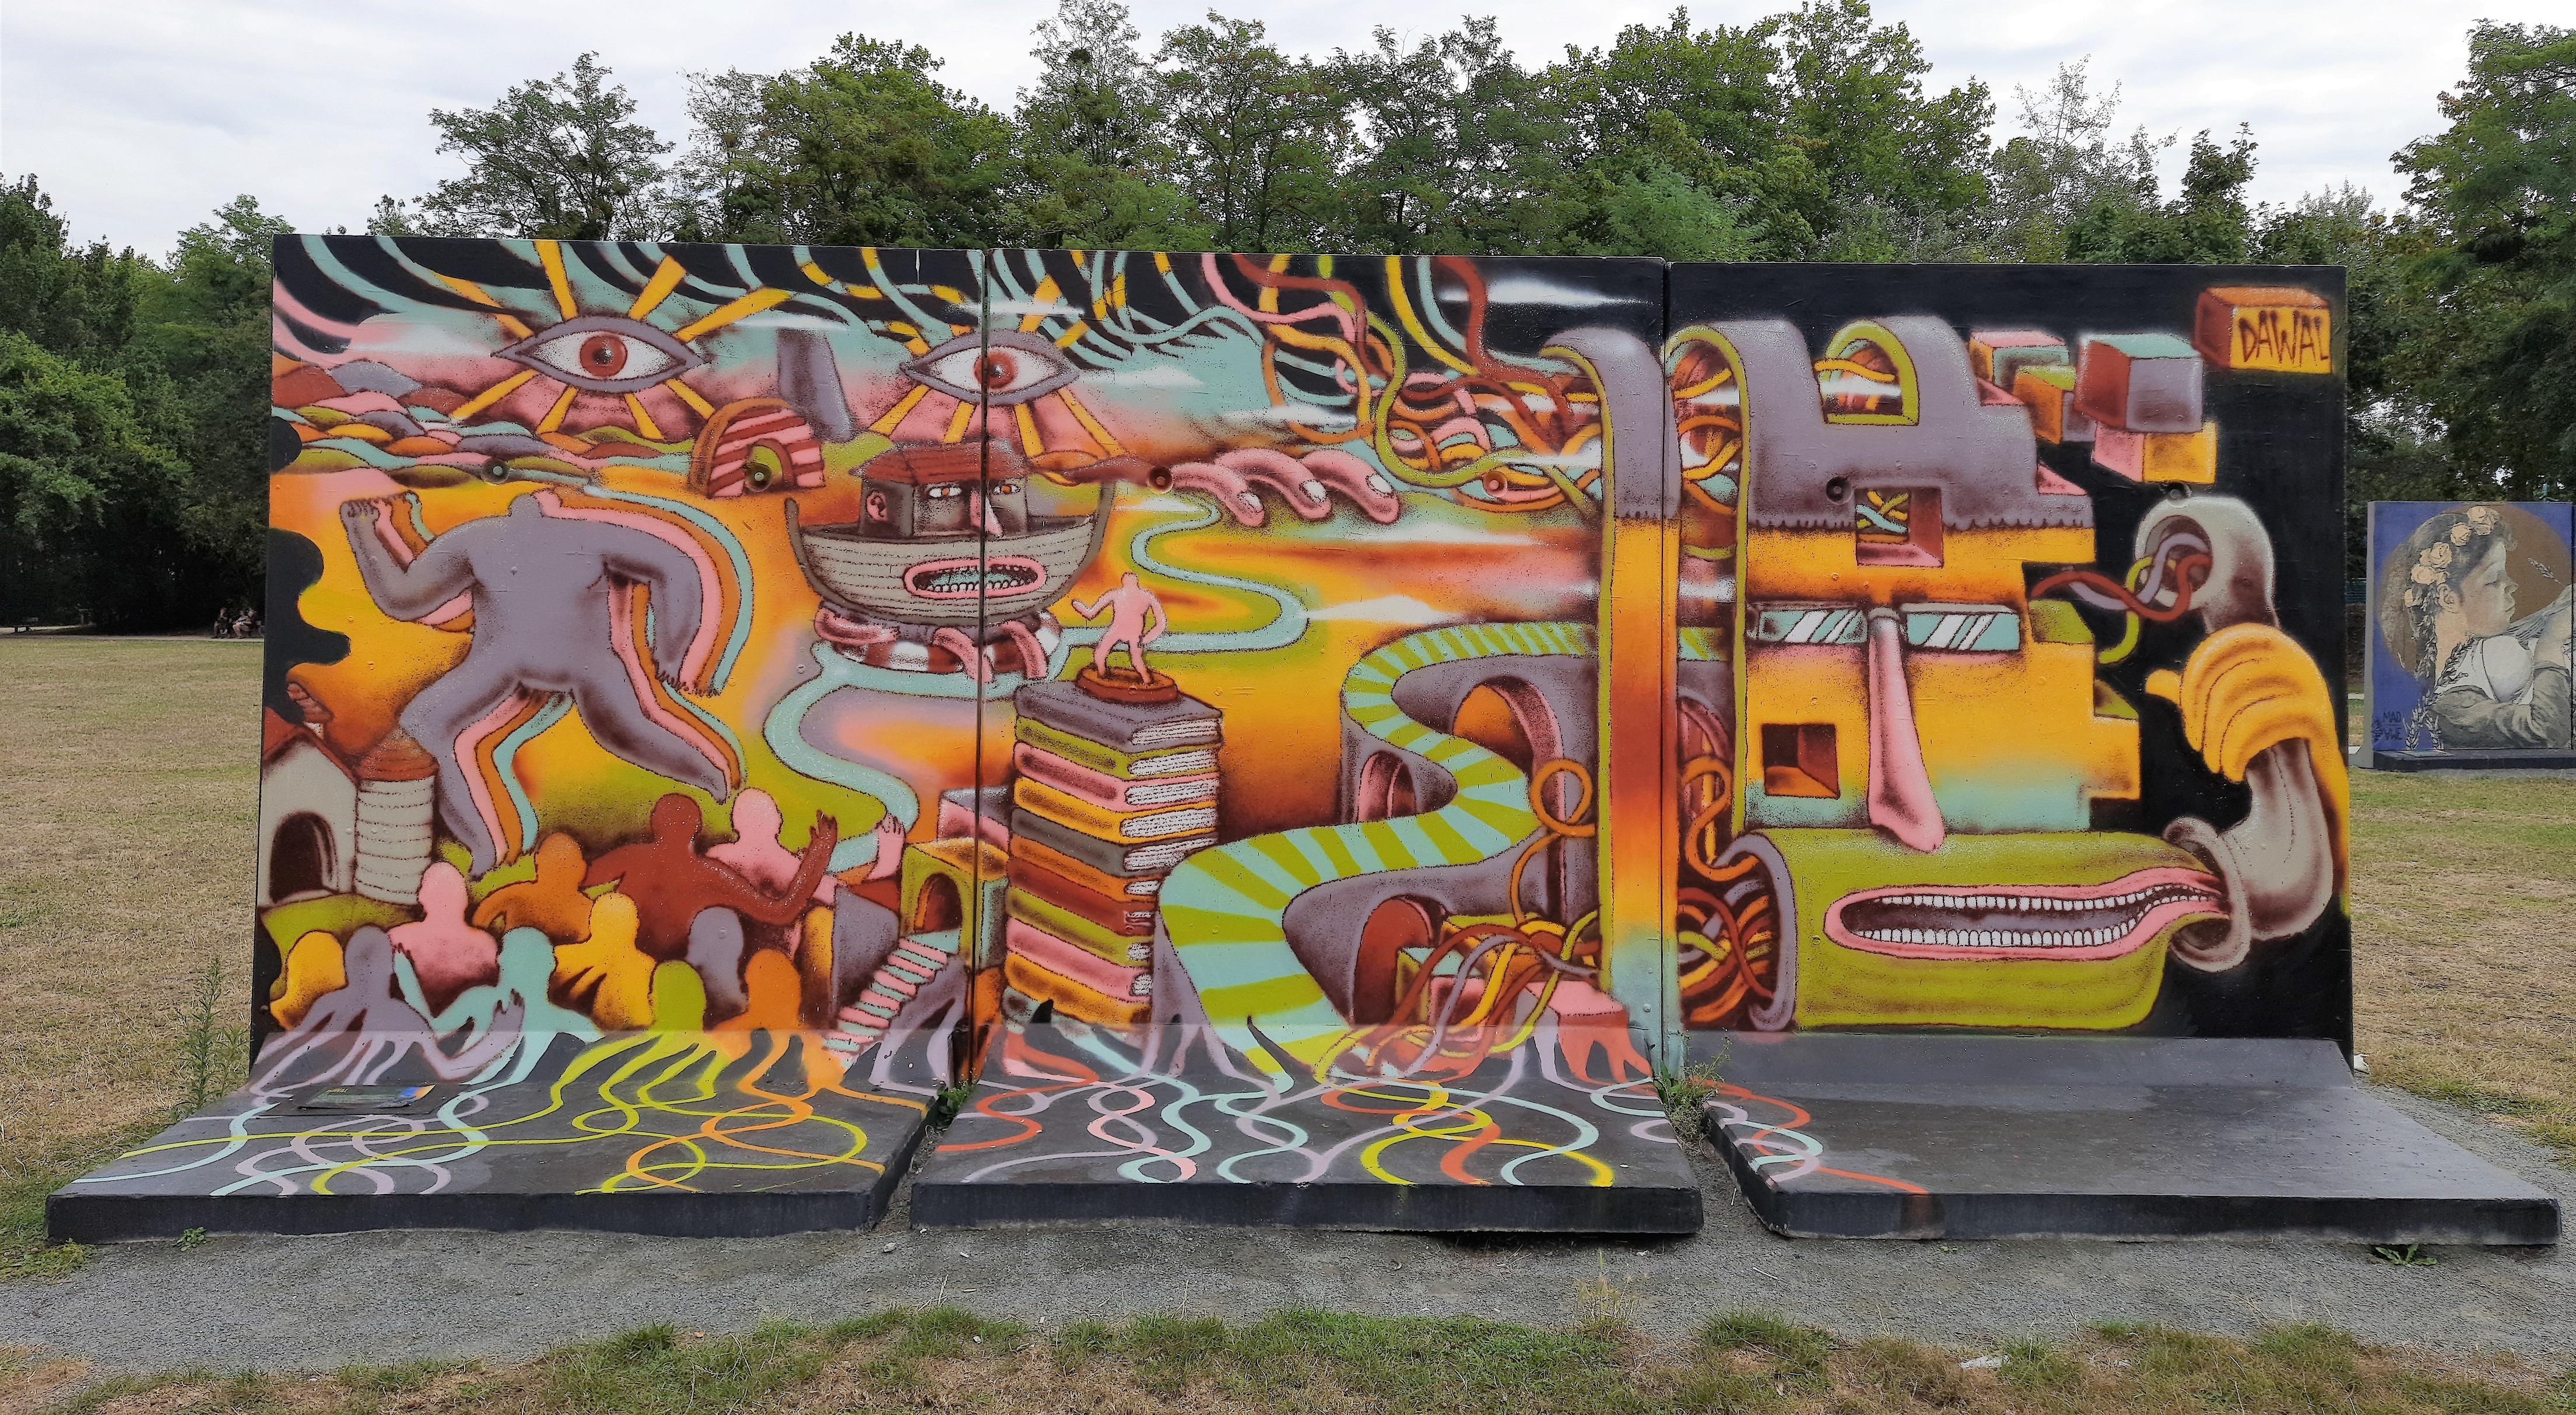 Graffiti 6983  by the artist Dawal captured by Mephisroth in Le Mans France